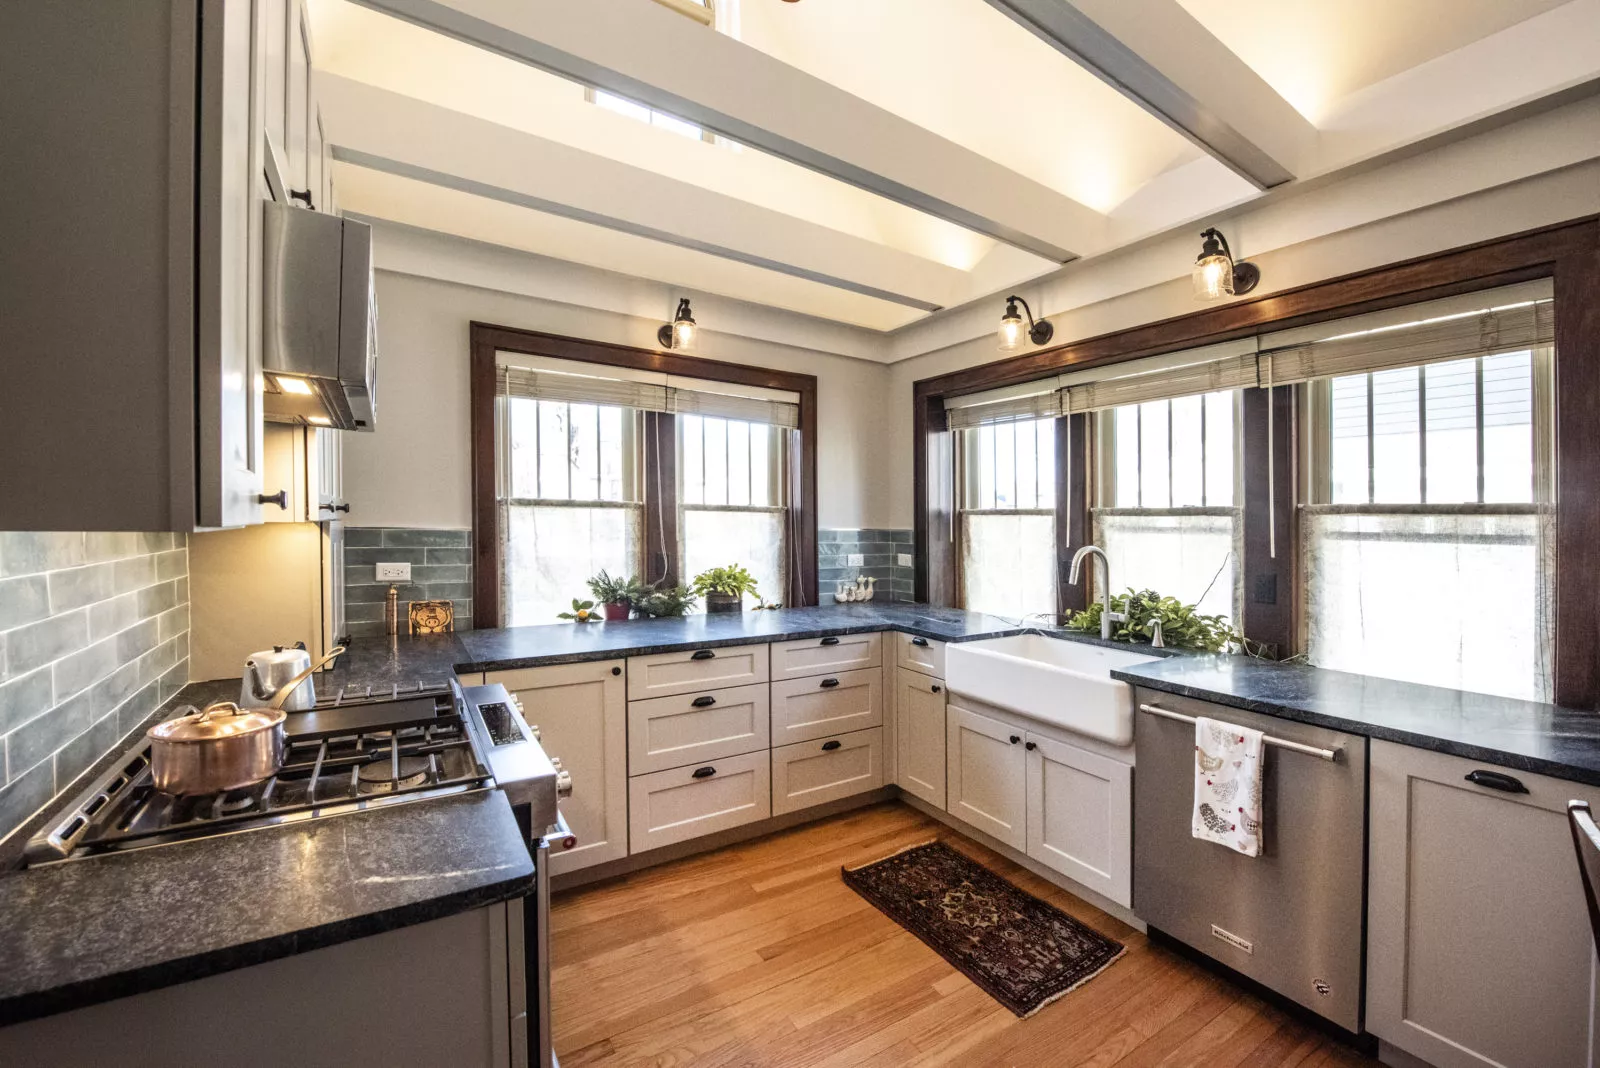 Cozy kitchen with grey cabinets & drawers, black granite countertops, silver appliances, 5 windows